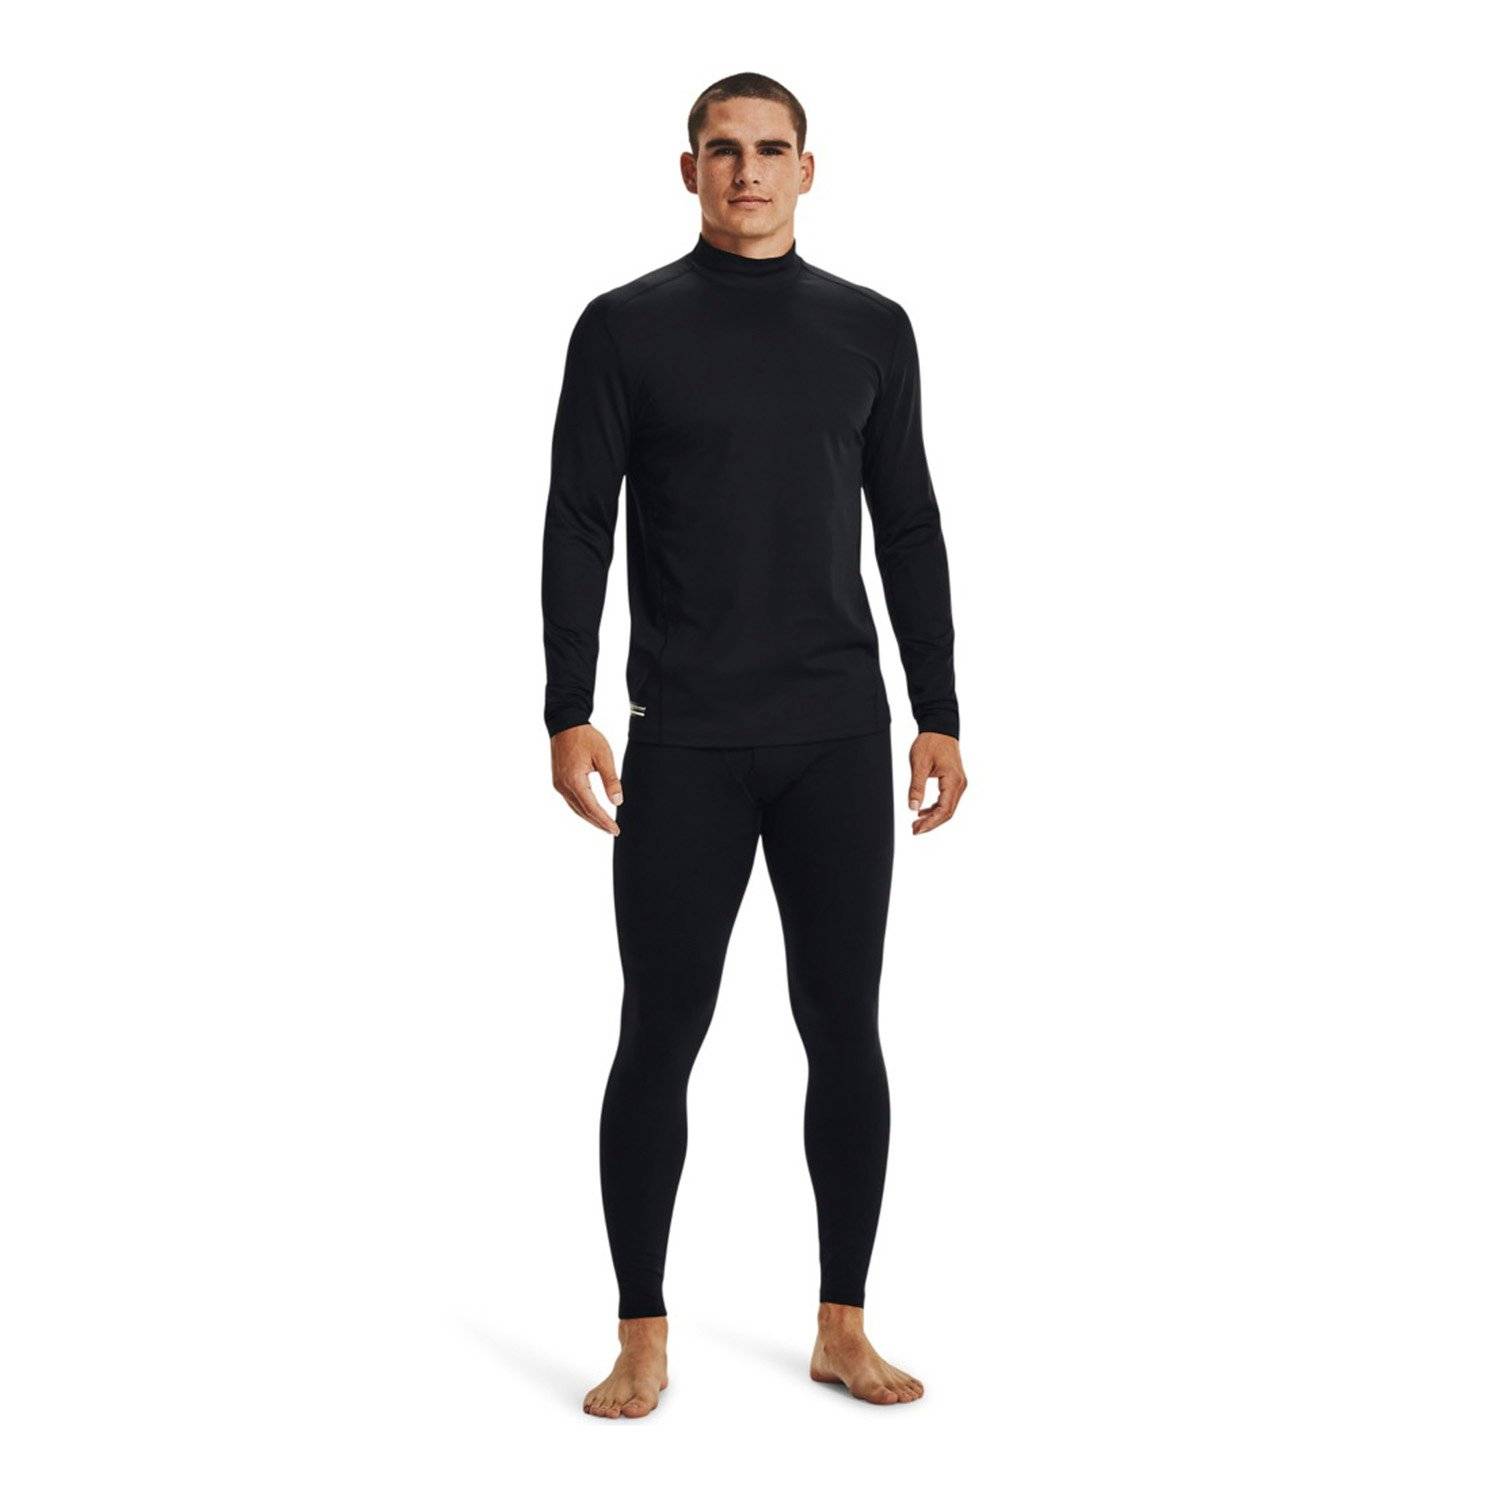 Under Armour Cold Gear Compression Mock - Product Review - Dec 24